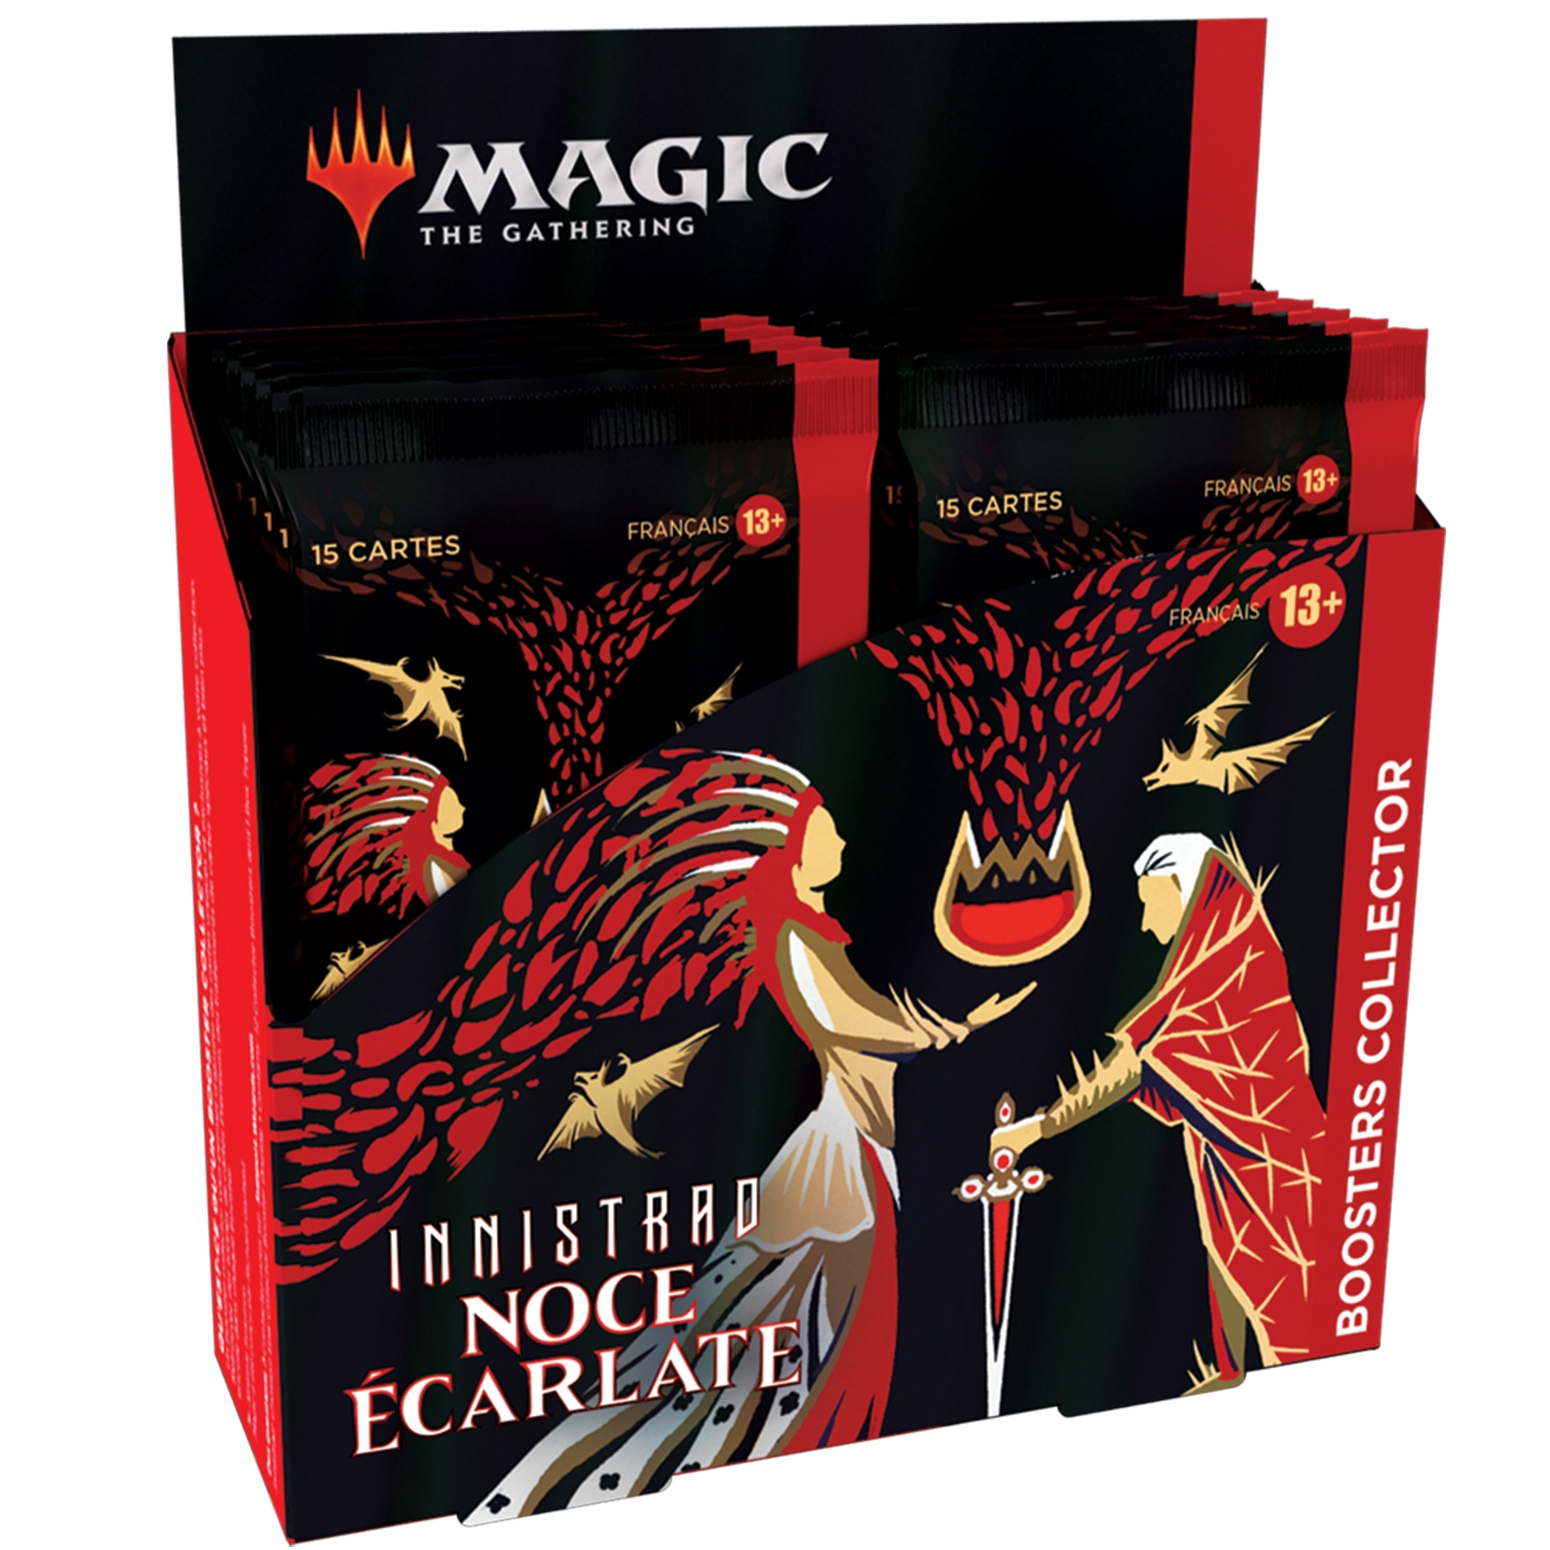 https://www.dstrib.com/images/produits/maxi/6464-cartes-a-collectionner-magic-the-gathering-boite-de-collector-innistrad-noce-ecarlate.jpg